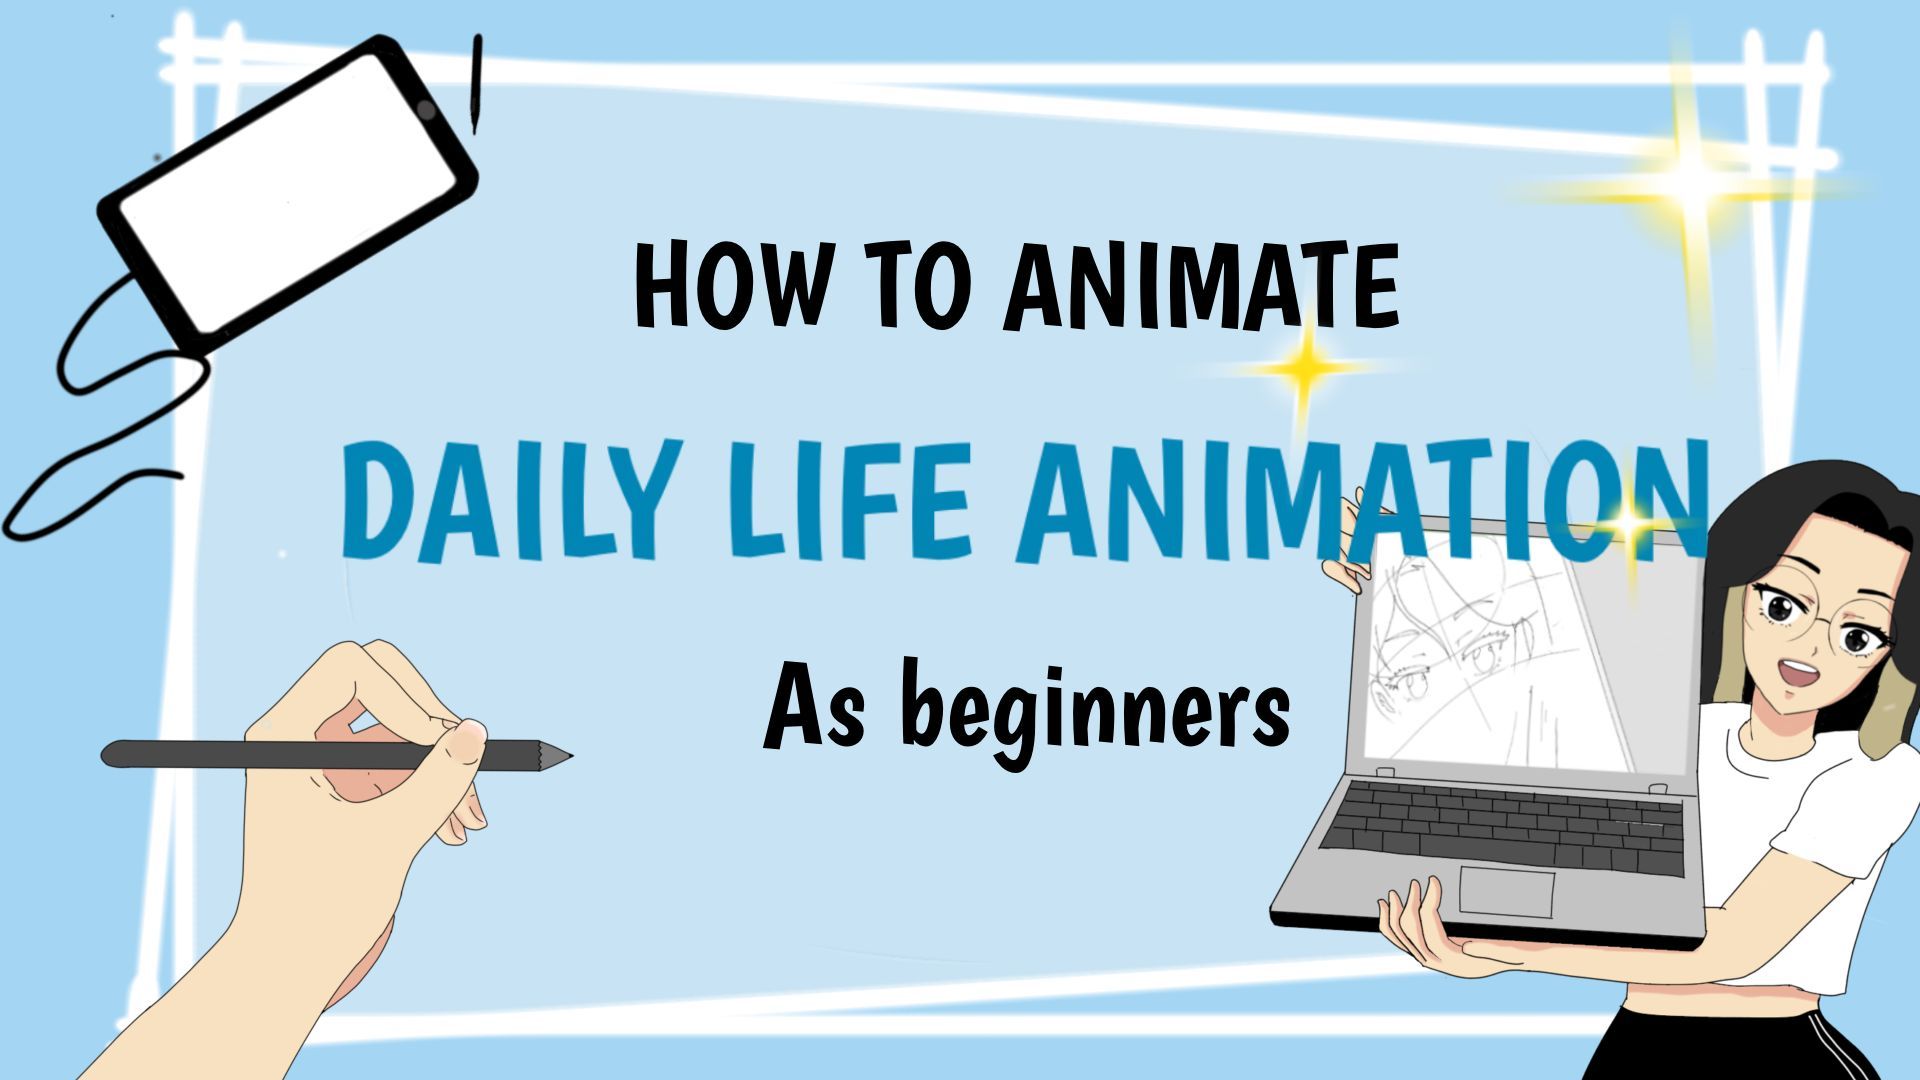 How to Animate Daily Life Animation- Simple Tutorial - Bilibili